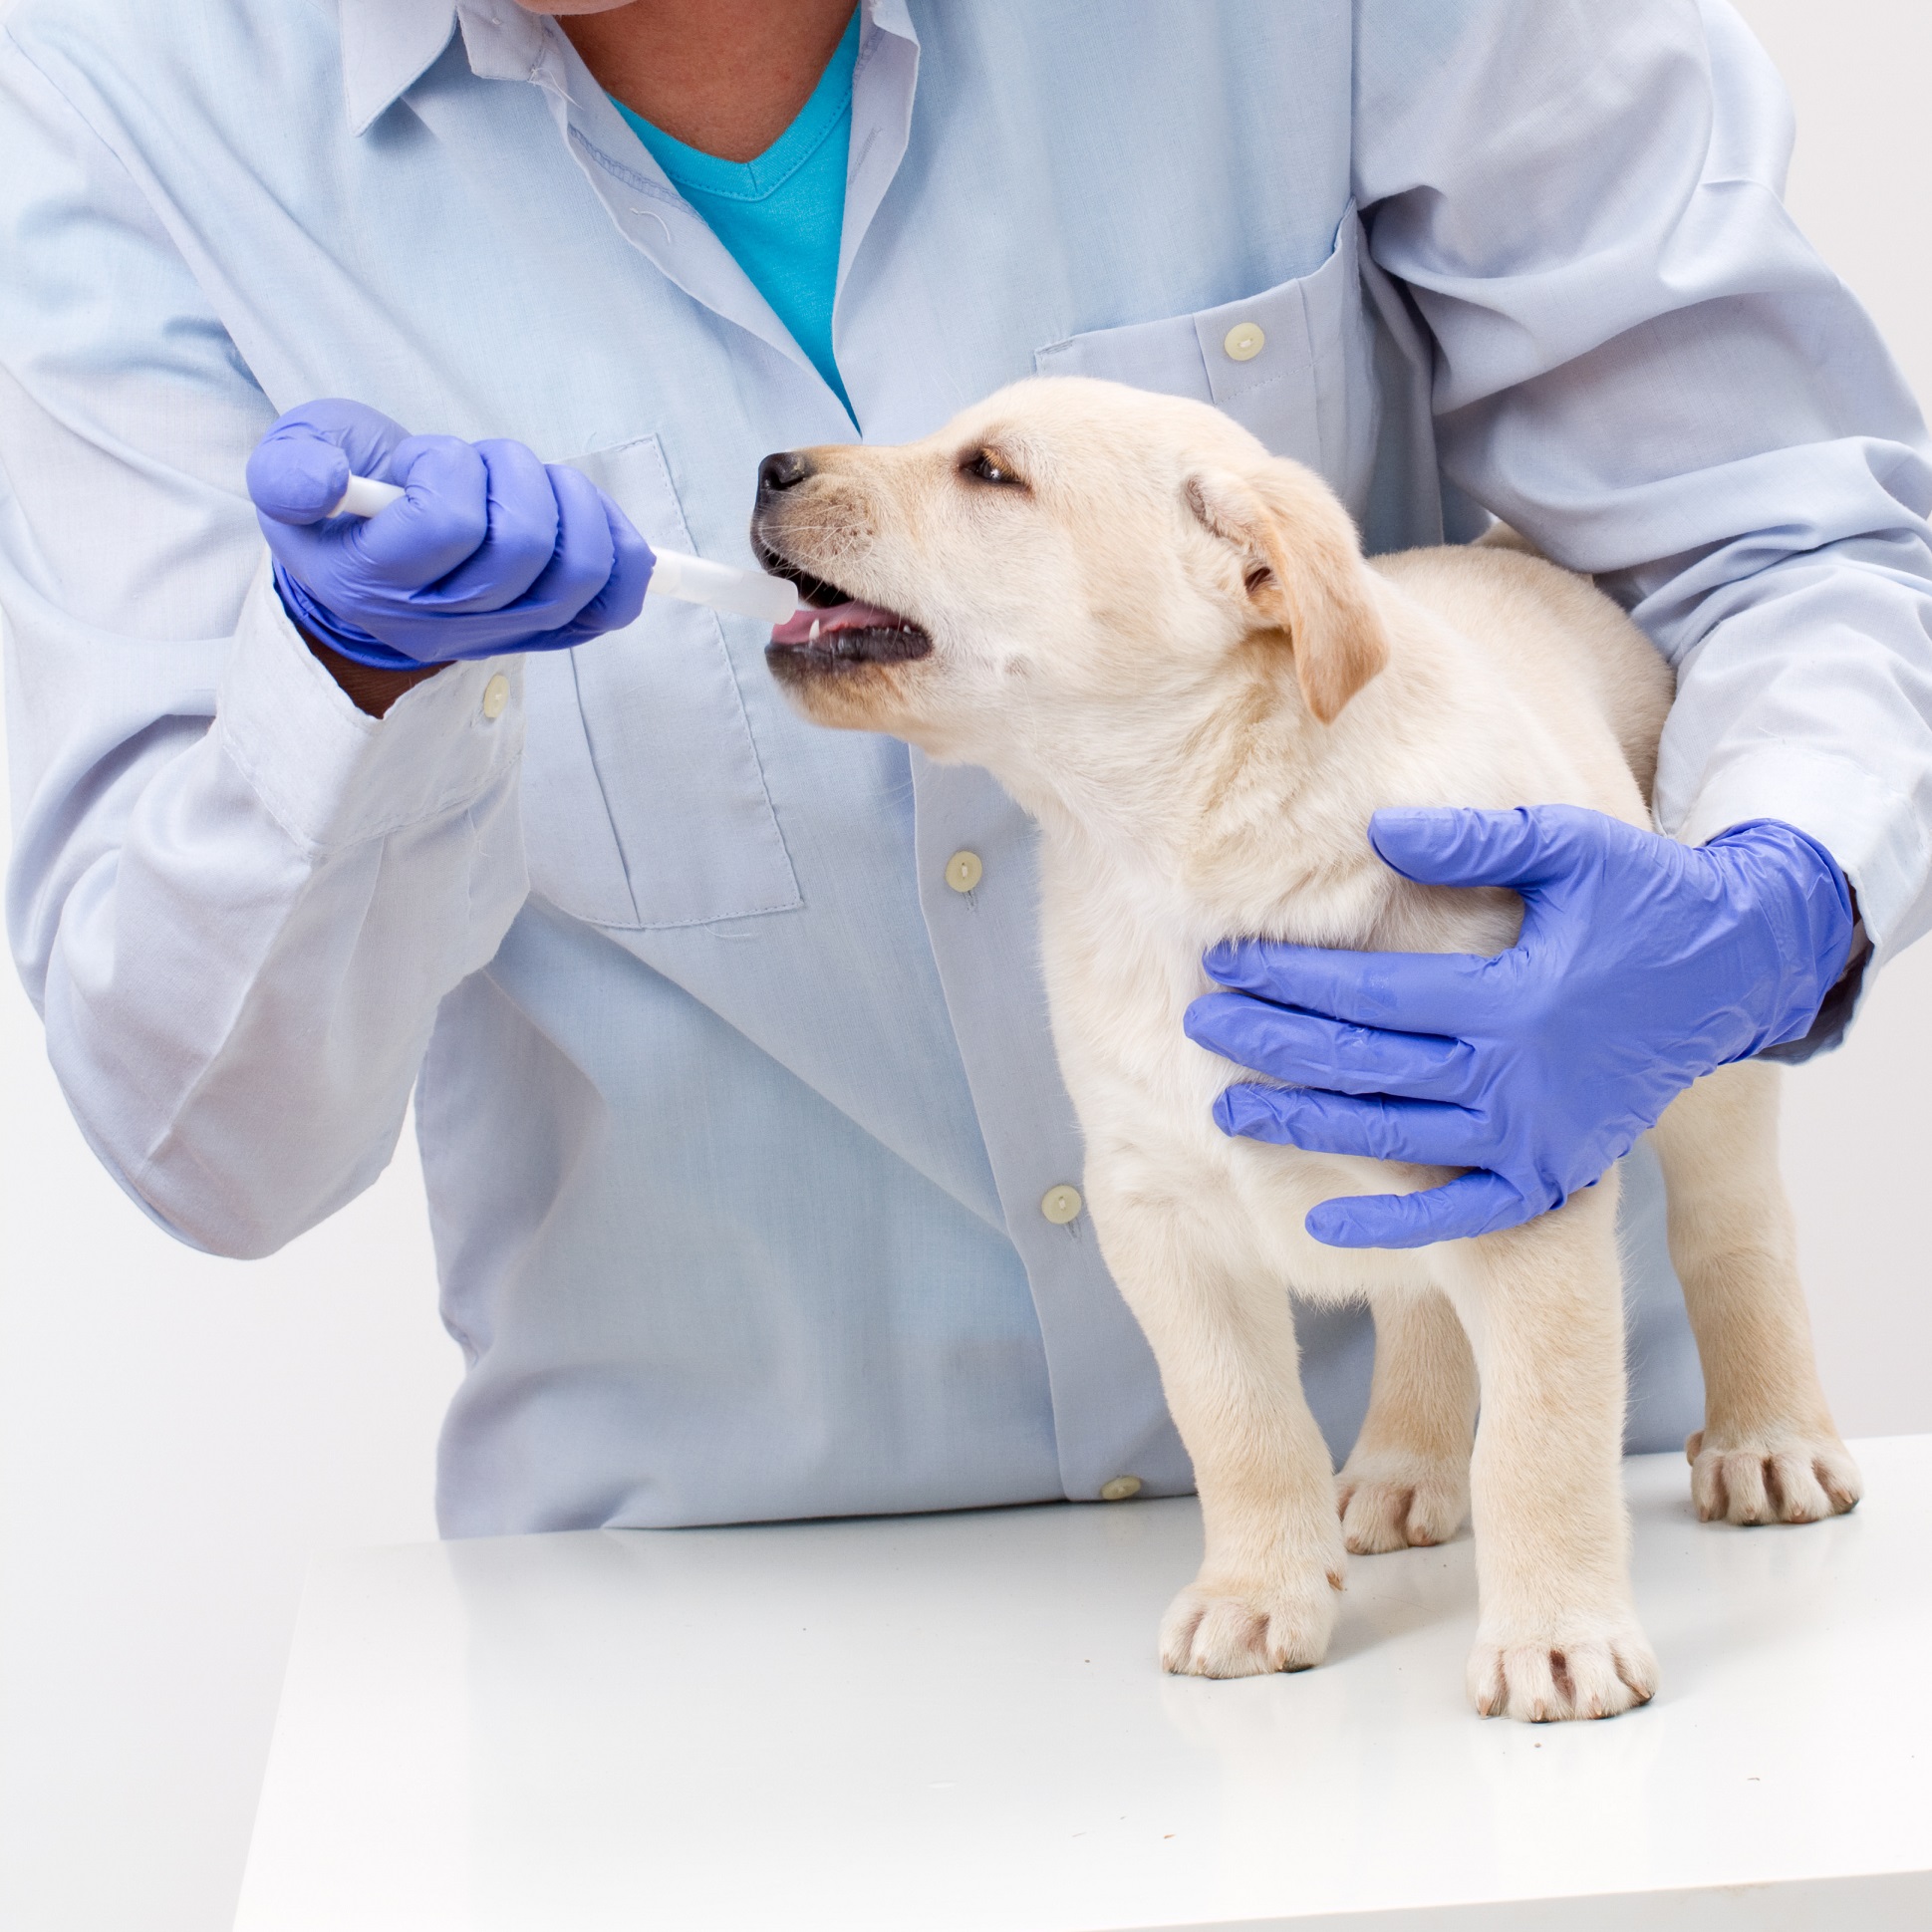 Veterinary is giving the medicine to the puppy of the labrador